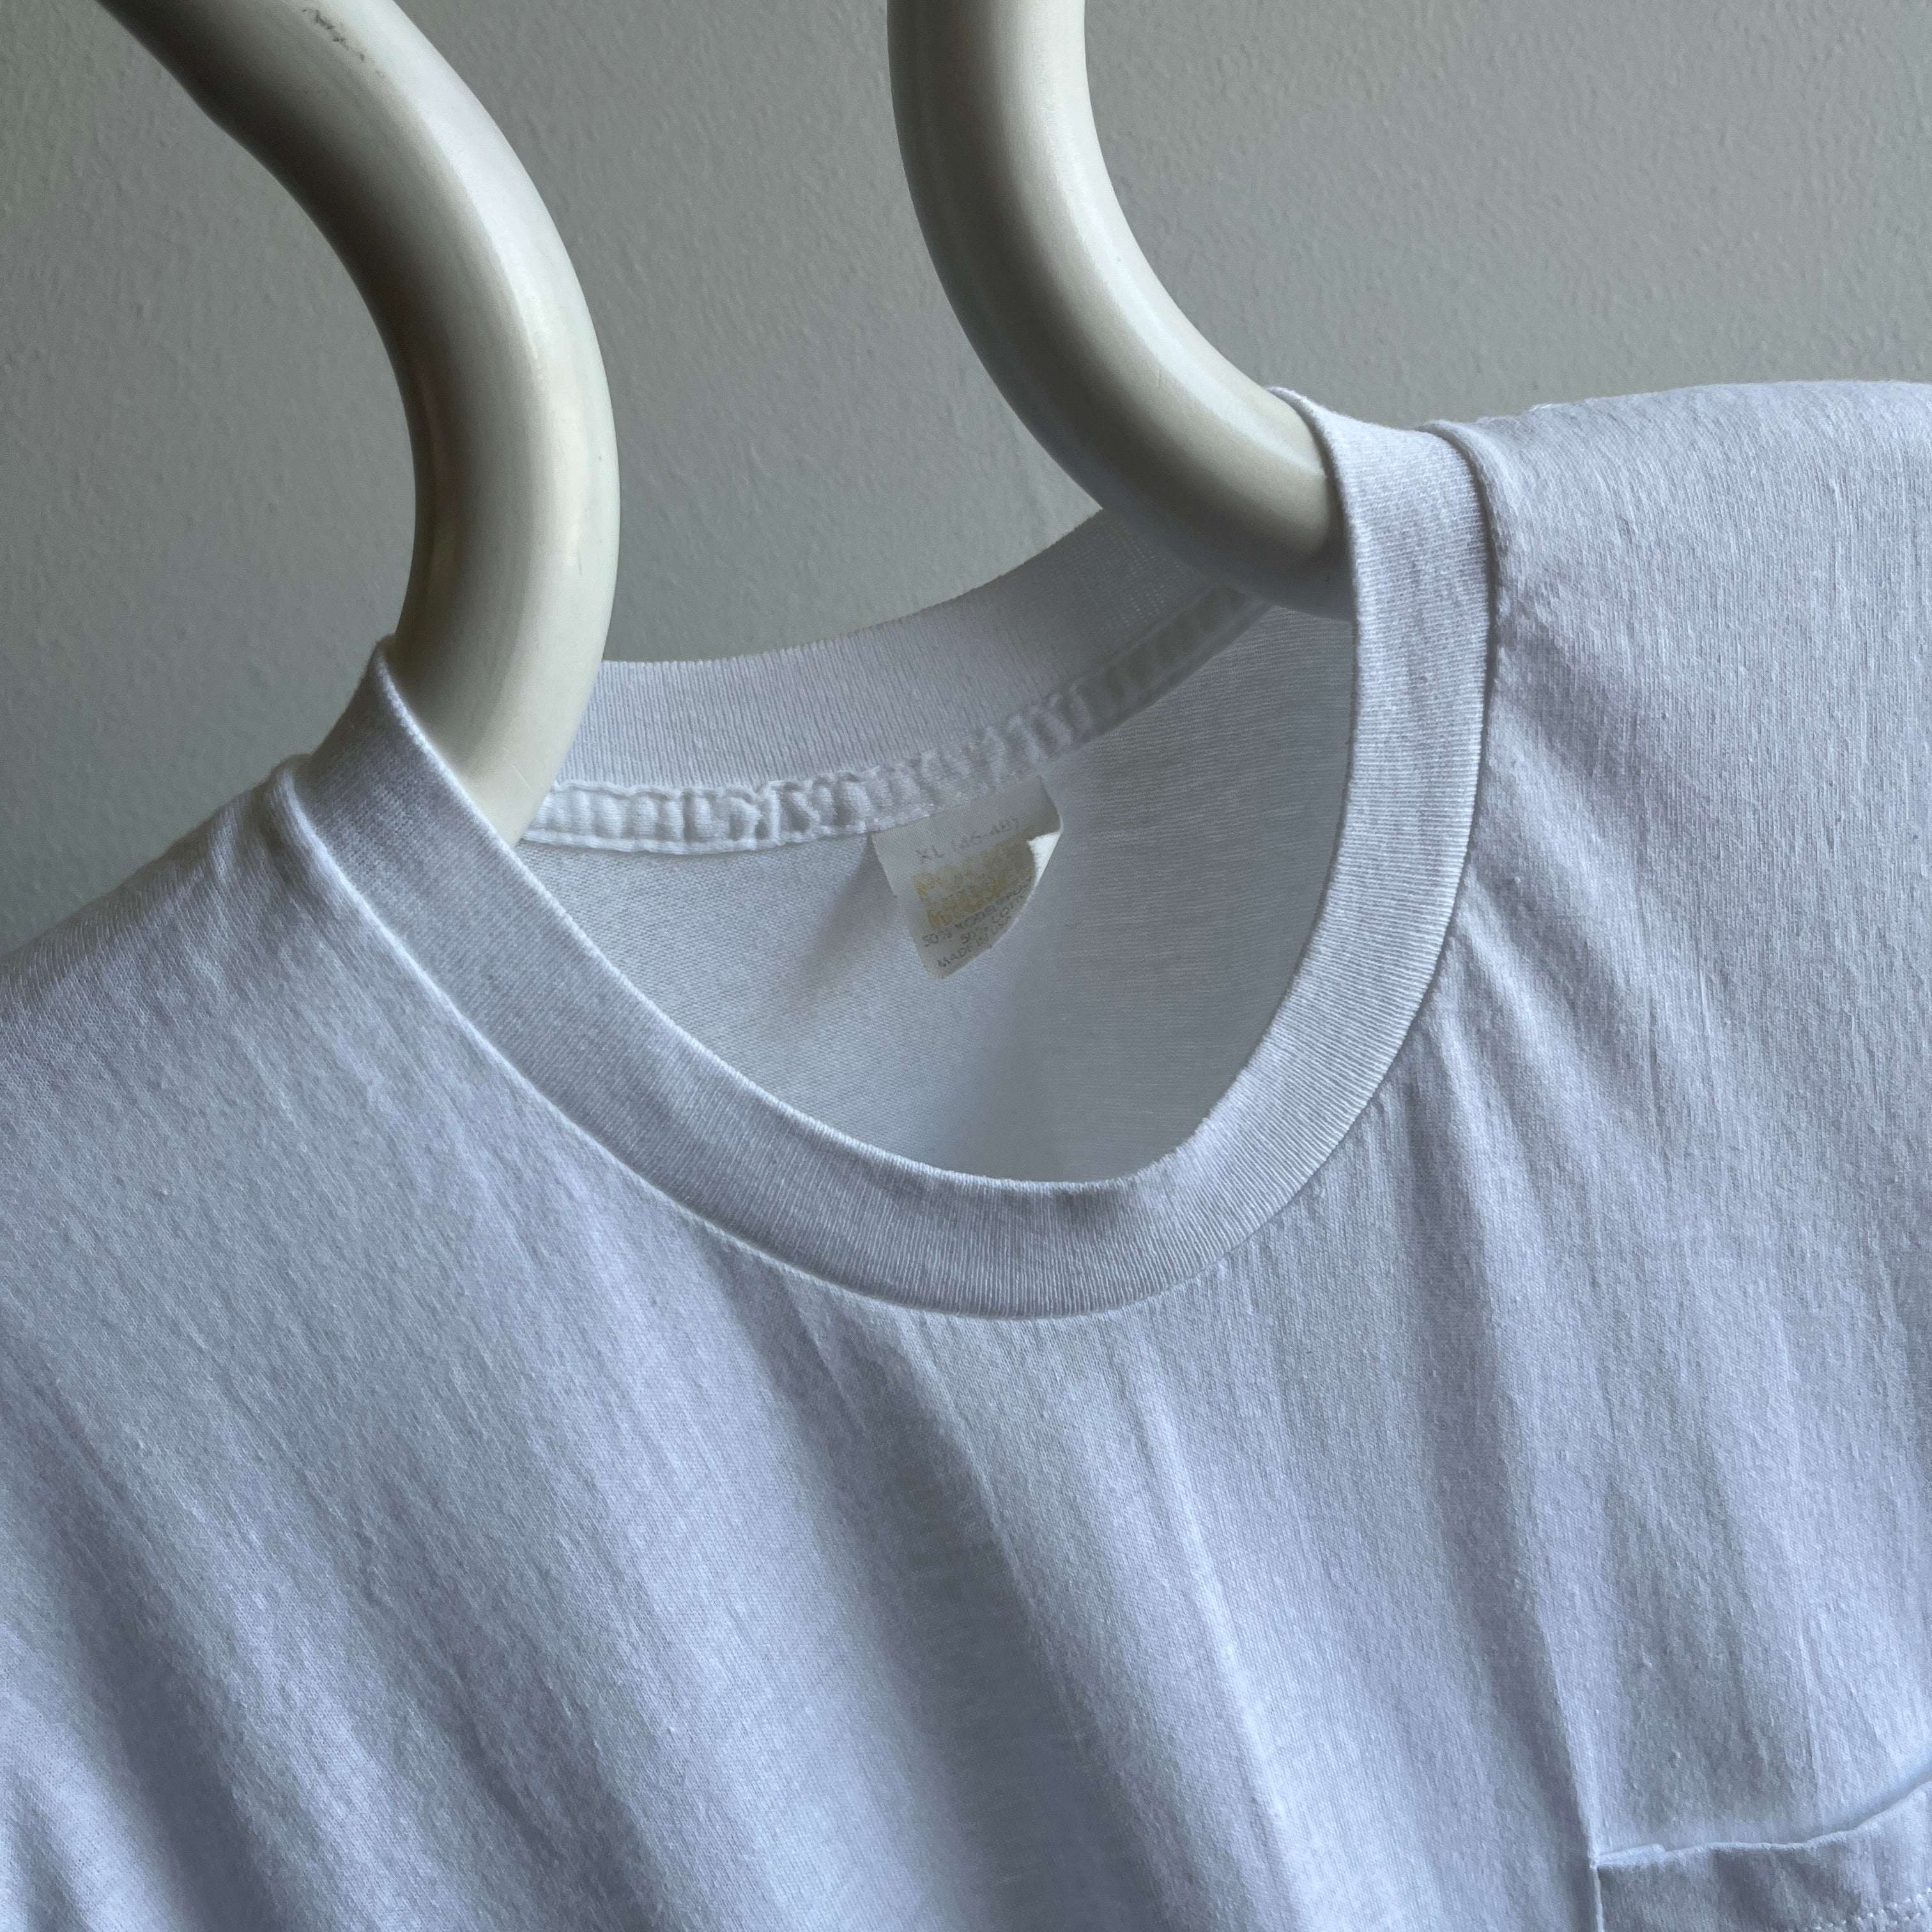 1980s Blank White Pocket Muscle T-Shirt